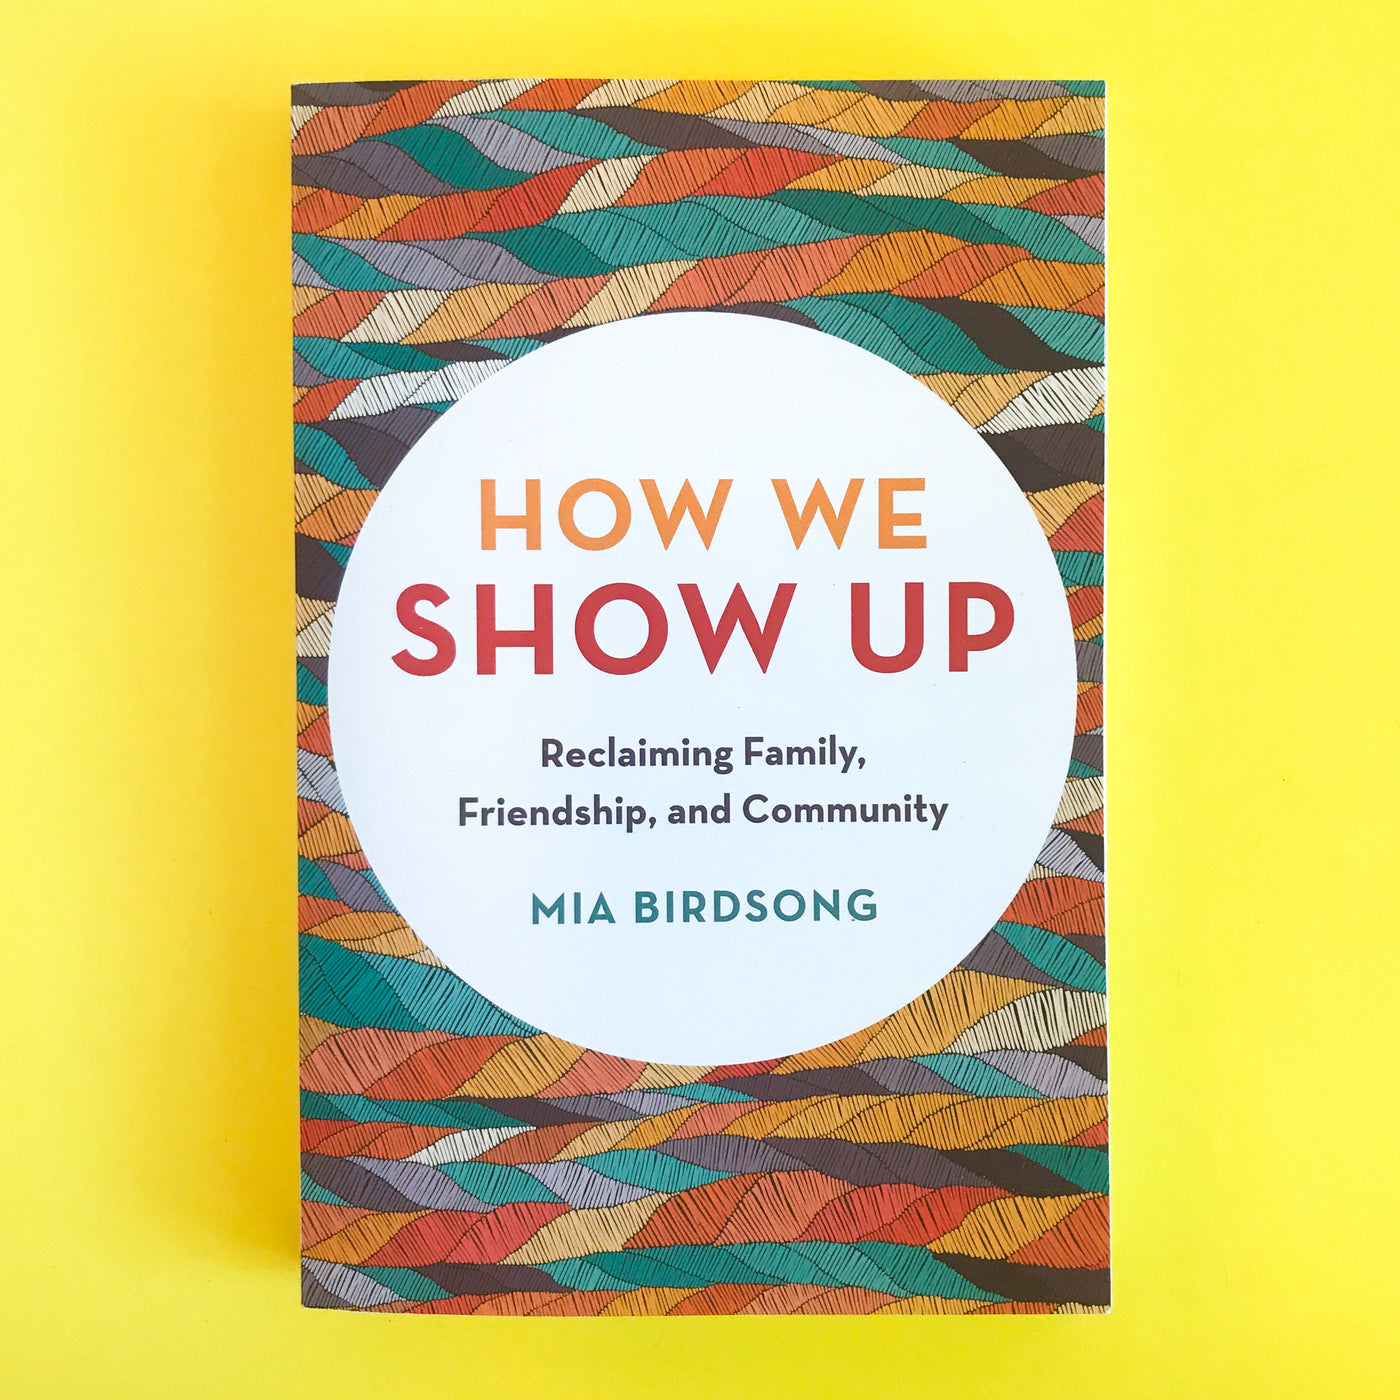 How We Show Up: Reclaiming Family, Friendship, and Community by Mia Birdsong